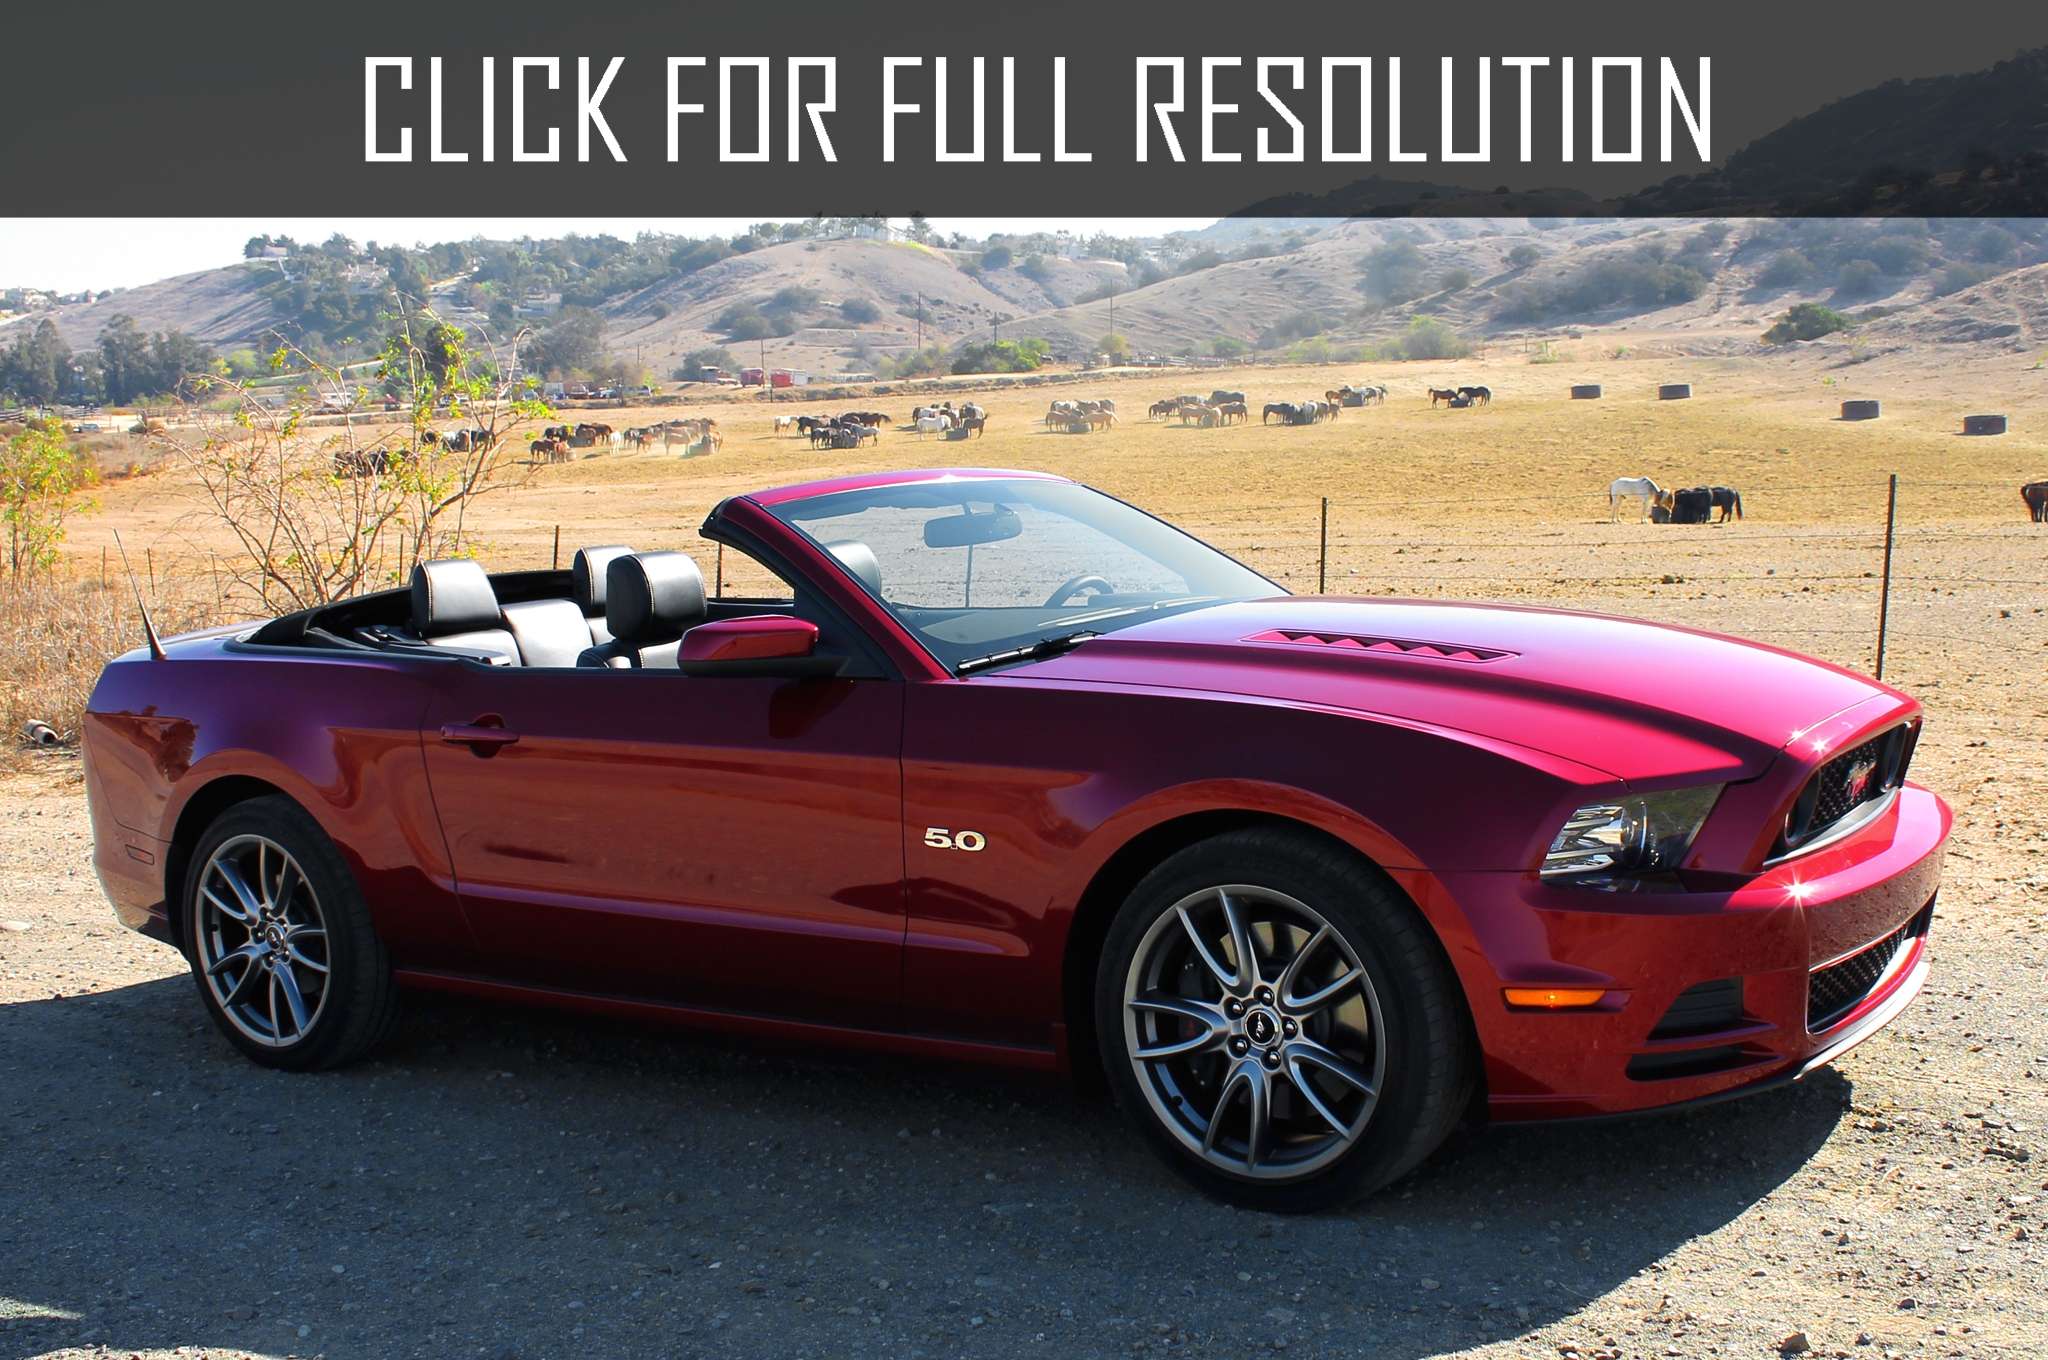 2014 Ford Mustang Convertible